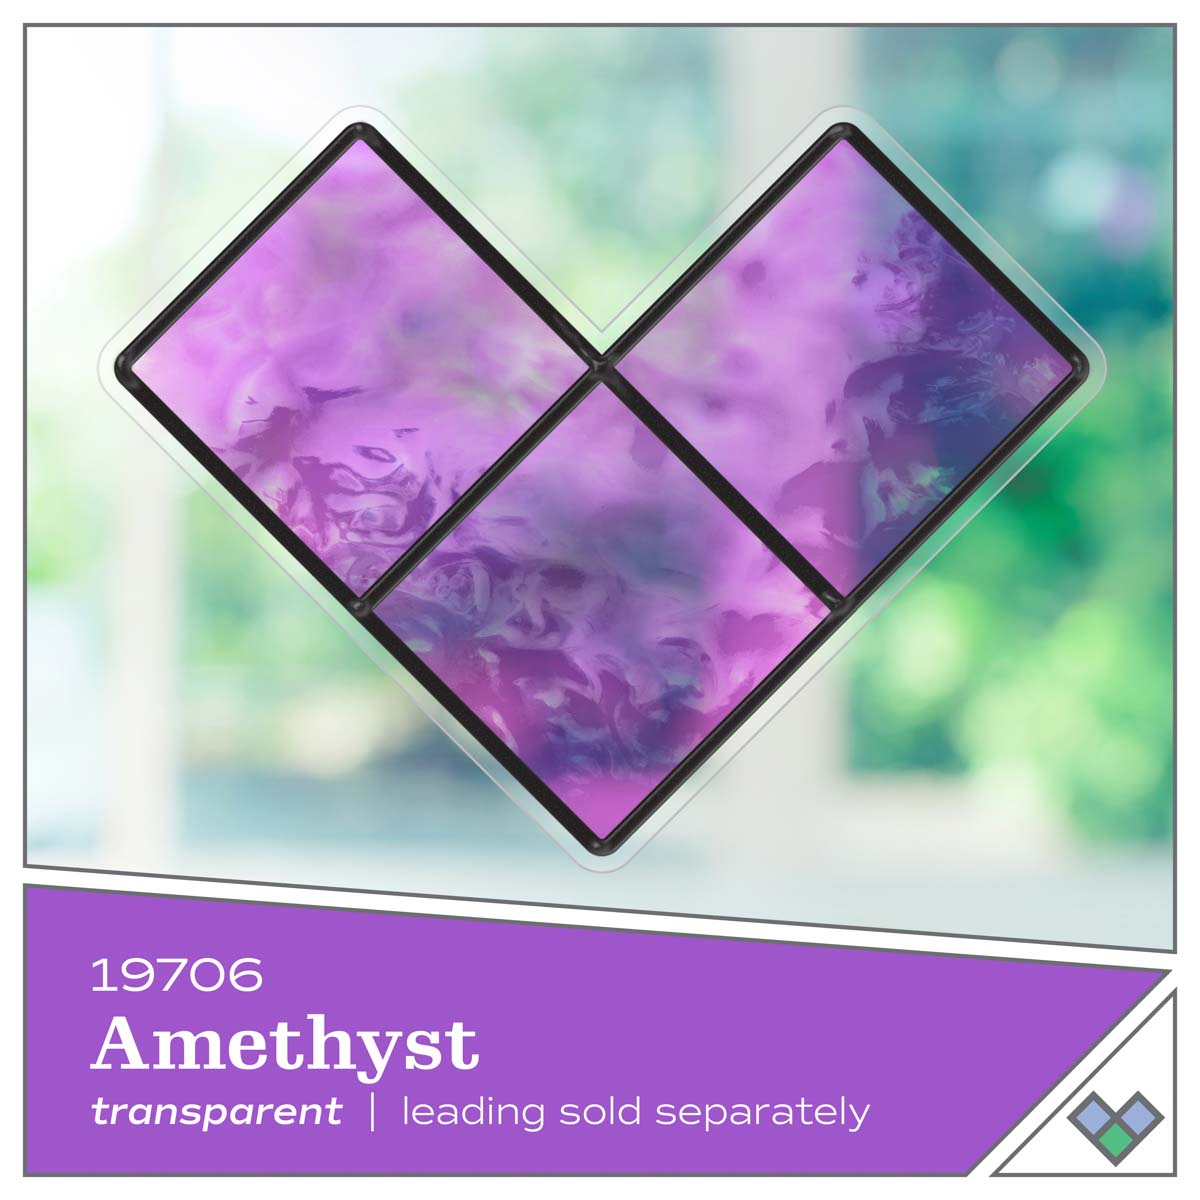 Gallery Glass ® Stained Glass Effect Paint - Amethyst, 2 oz. - 19706